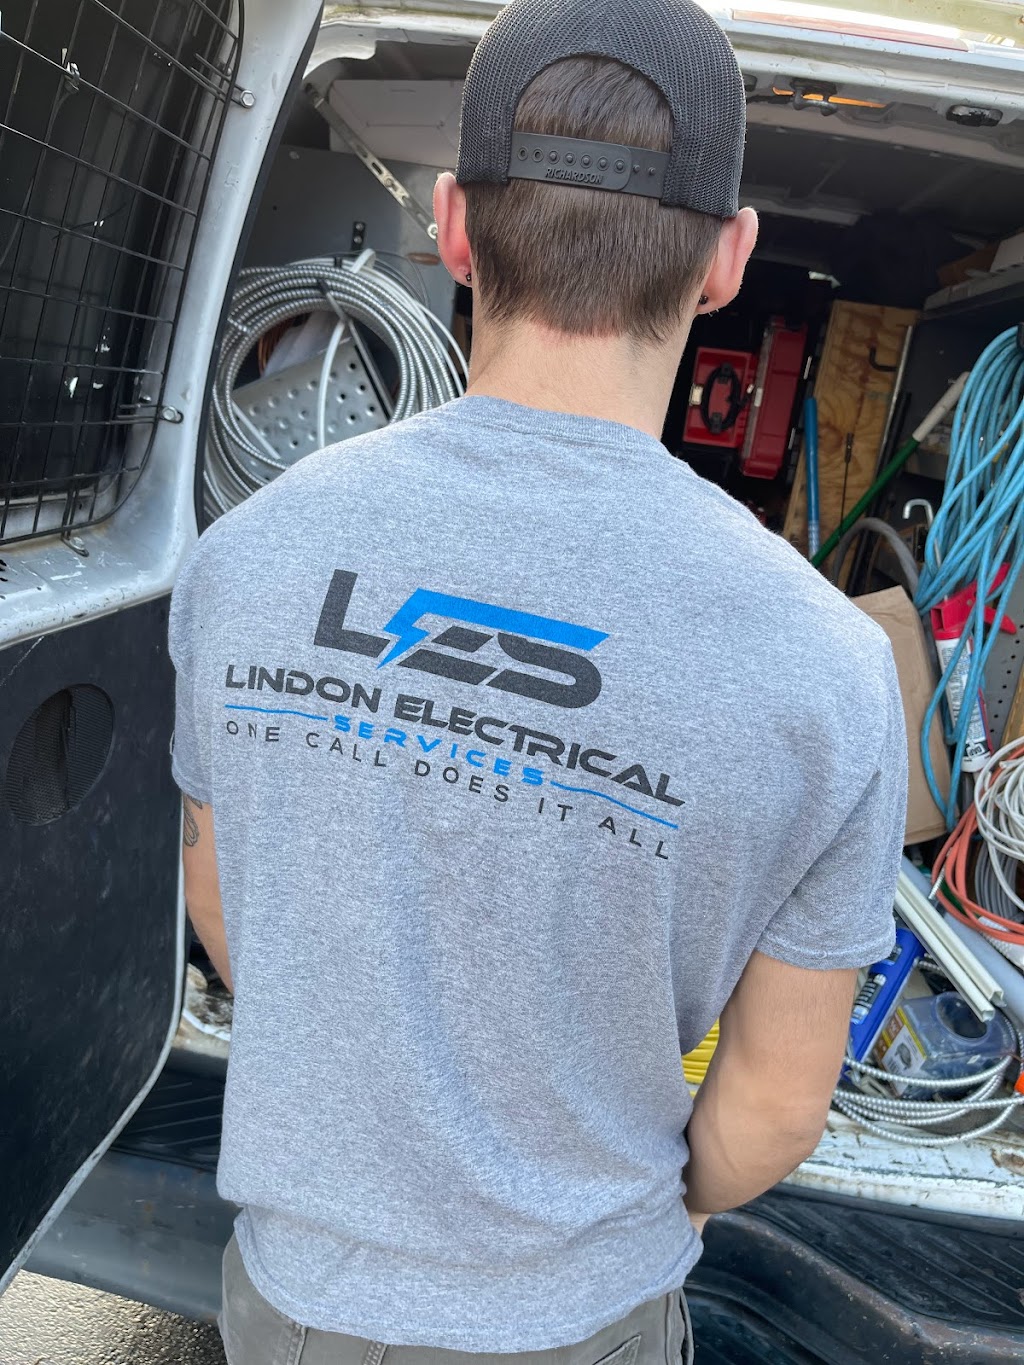 Lindon Electrical Services | 6711 W Alexandria Rd, Middletown, OH 45042 | Phone: (937) 733-3901